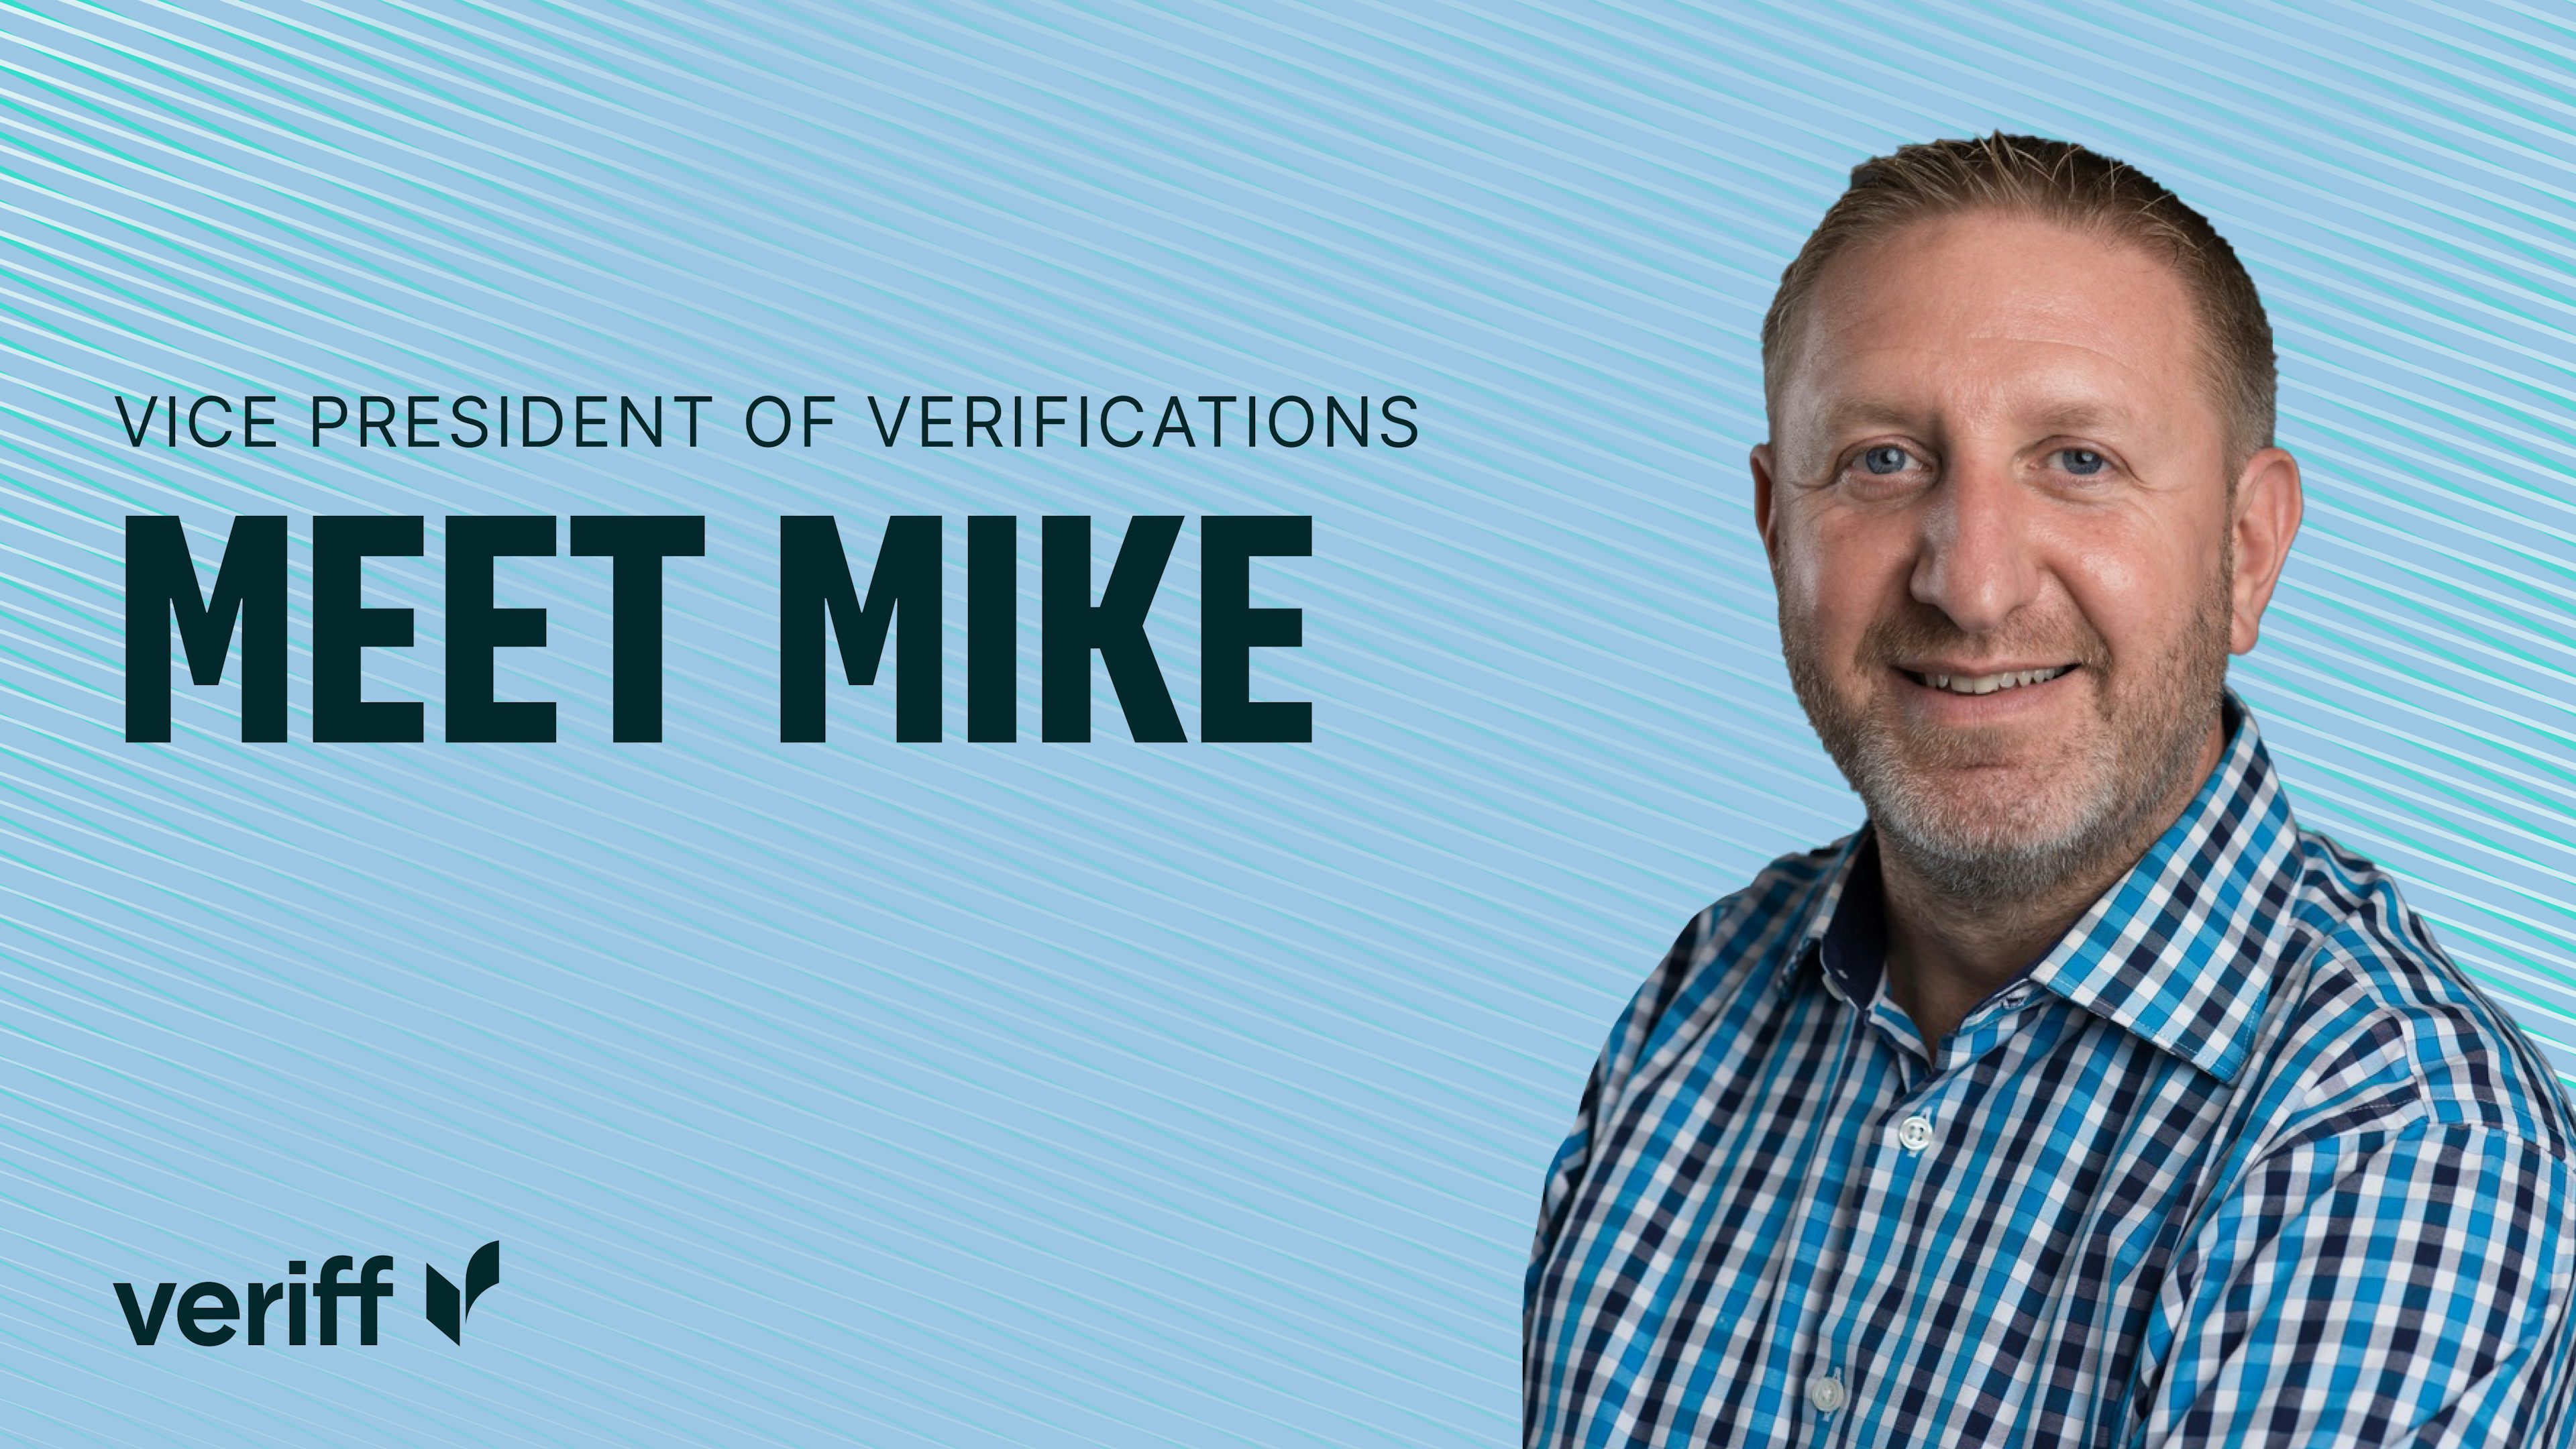 Meet Mike O’Callaghan, Veriff’s Vice President of Verifications